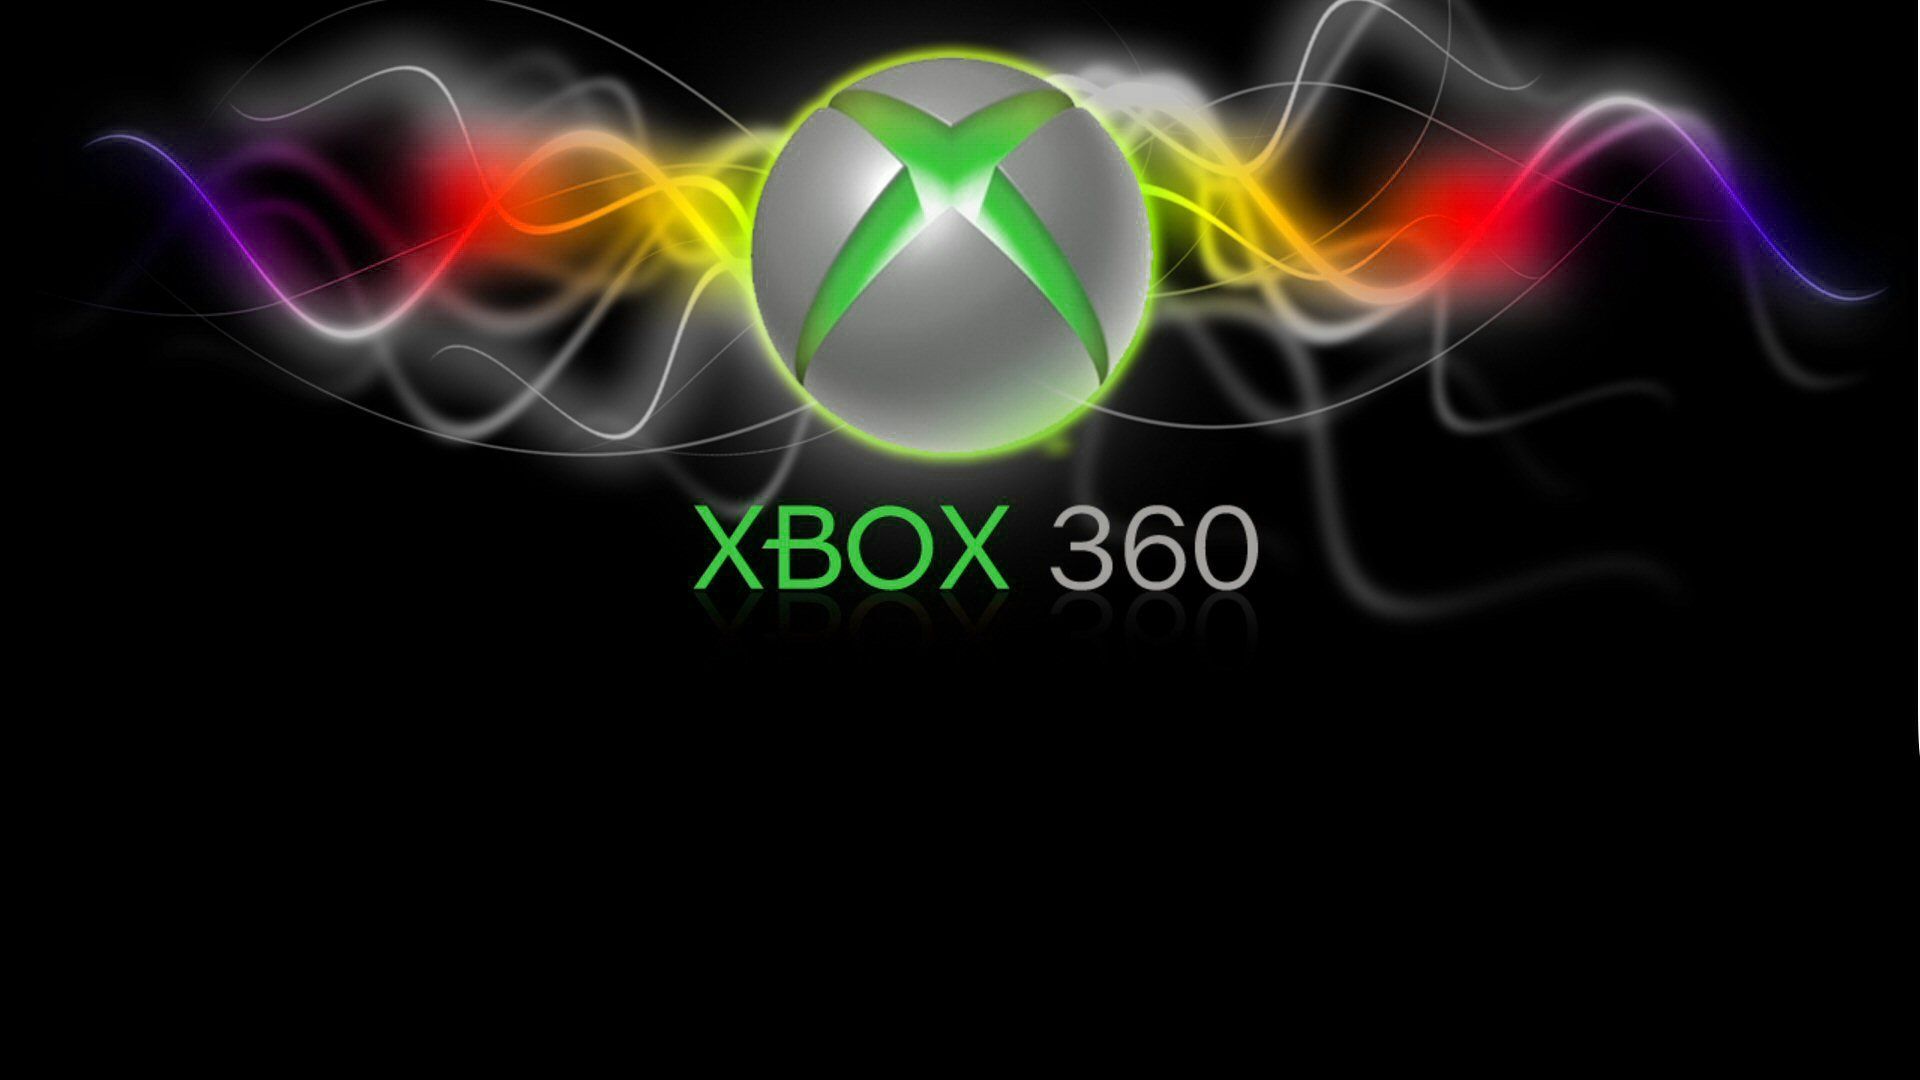 XBox360LogoWallpapers - NXE Wallpapers